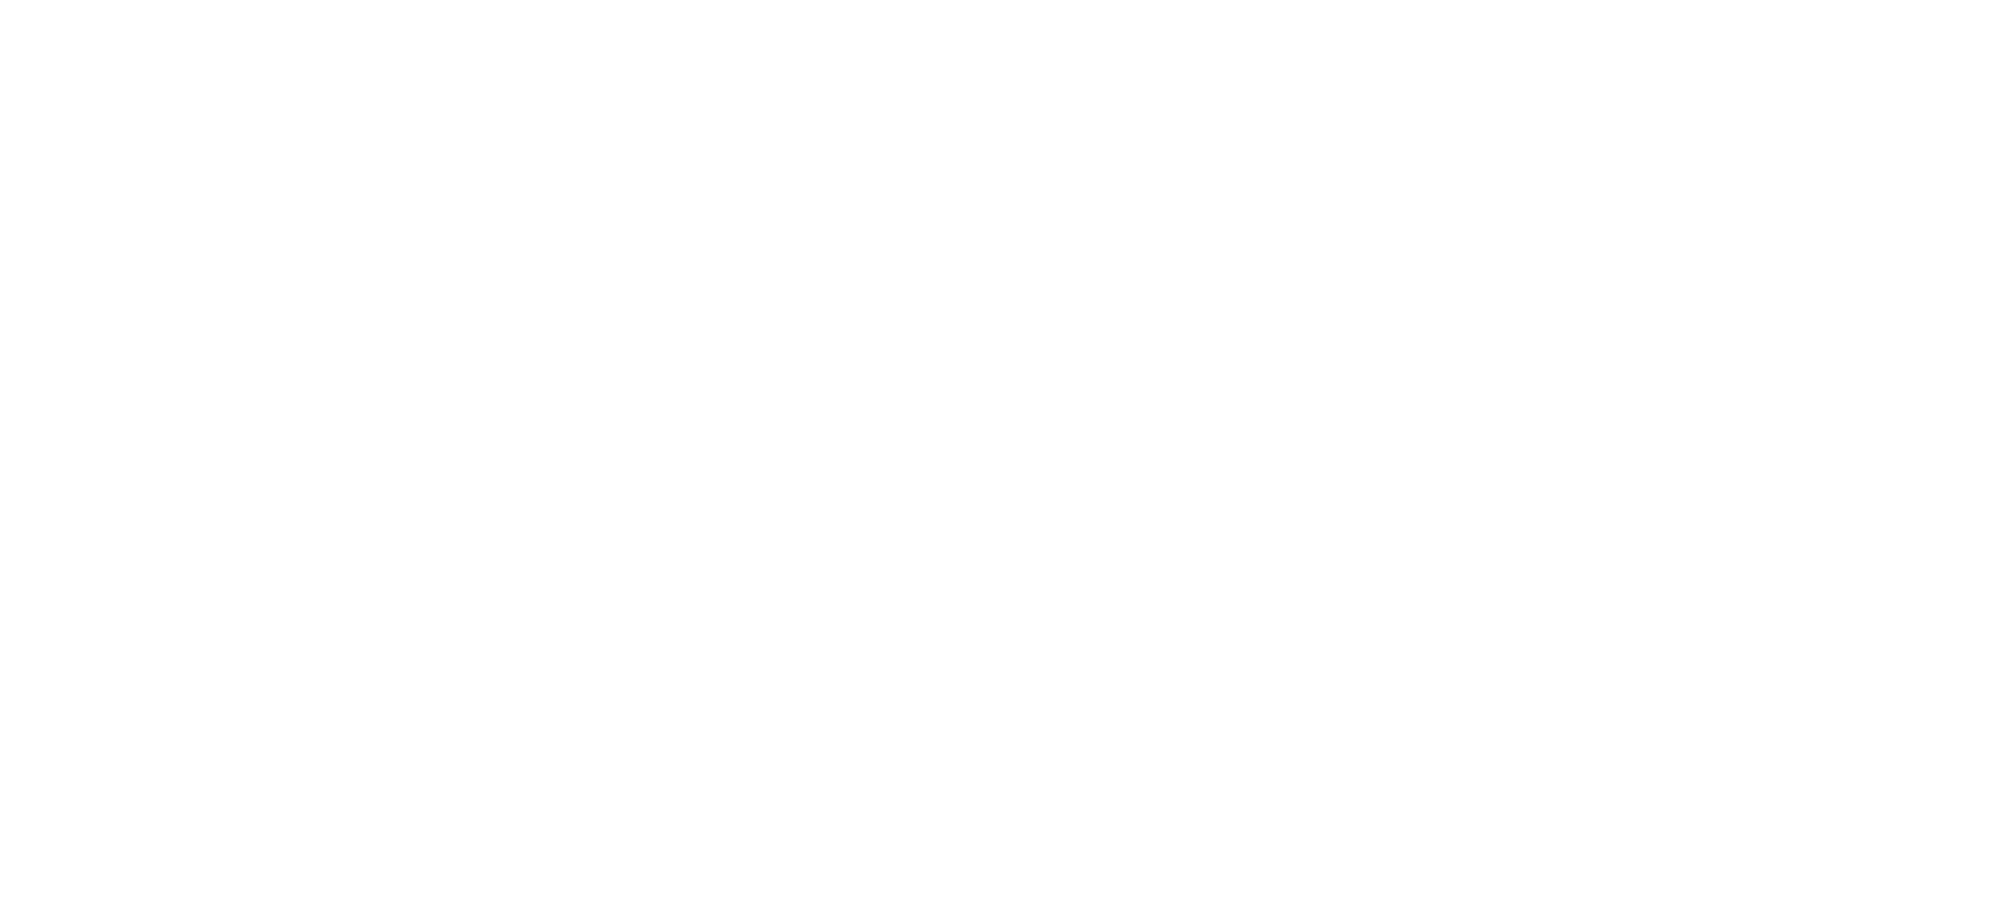 Prima Shipping Group